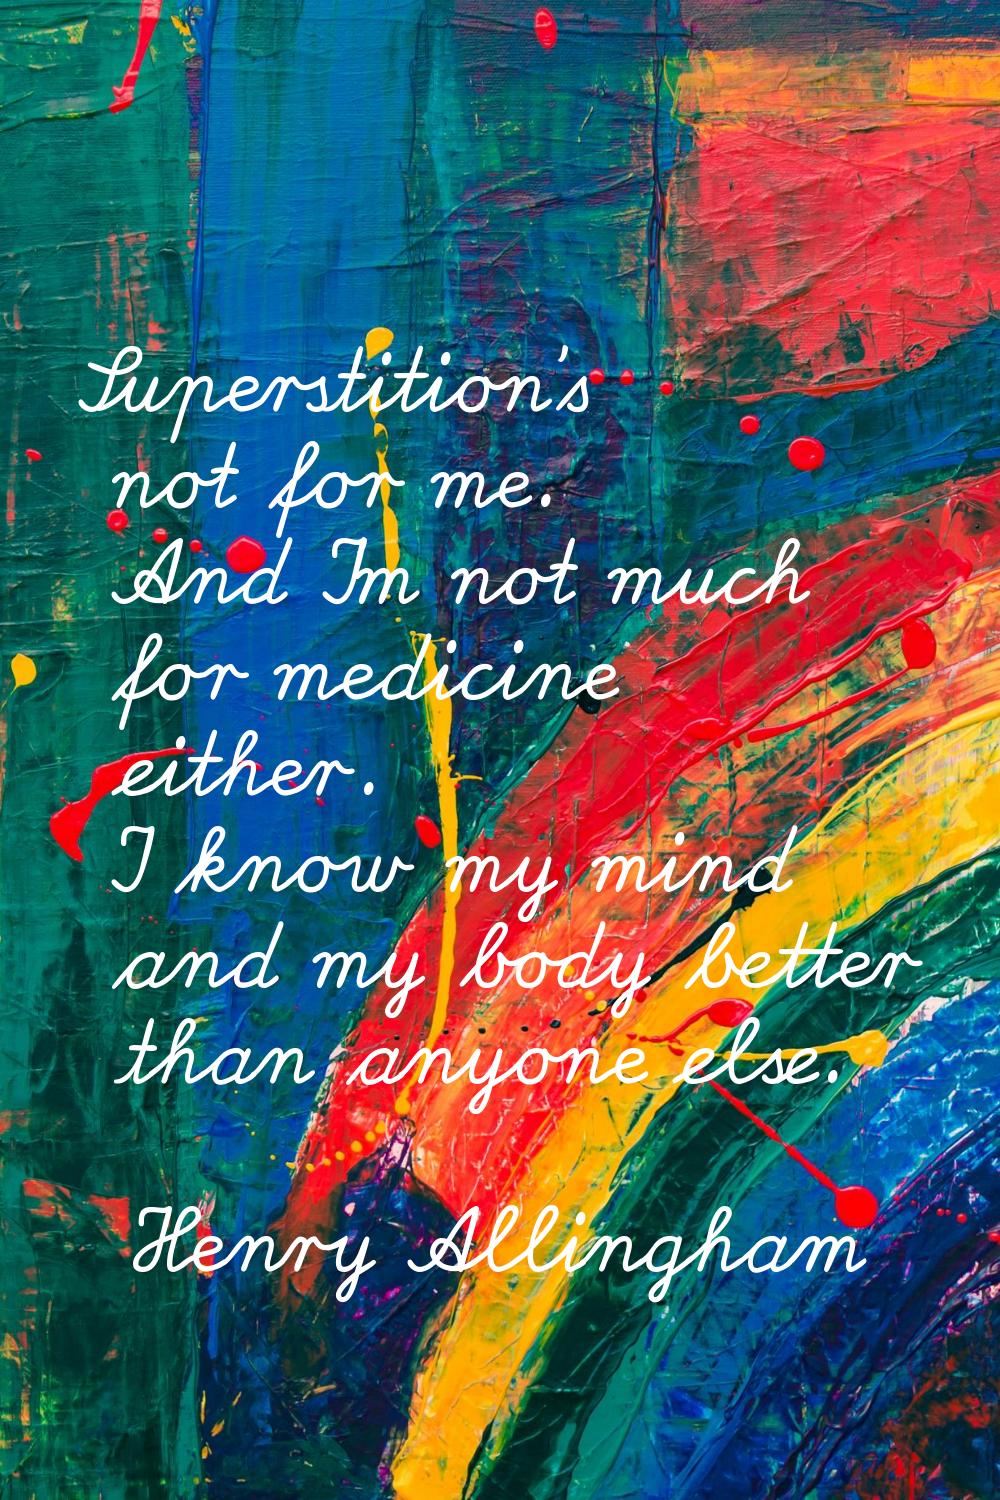 Superstition's not for me. And I'm not much for medicine either. I know my mind and my body better 